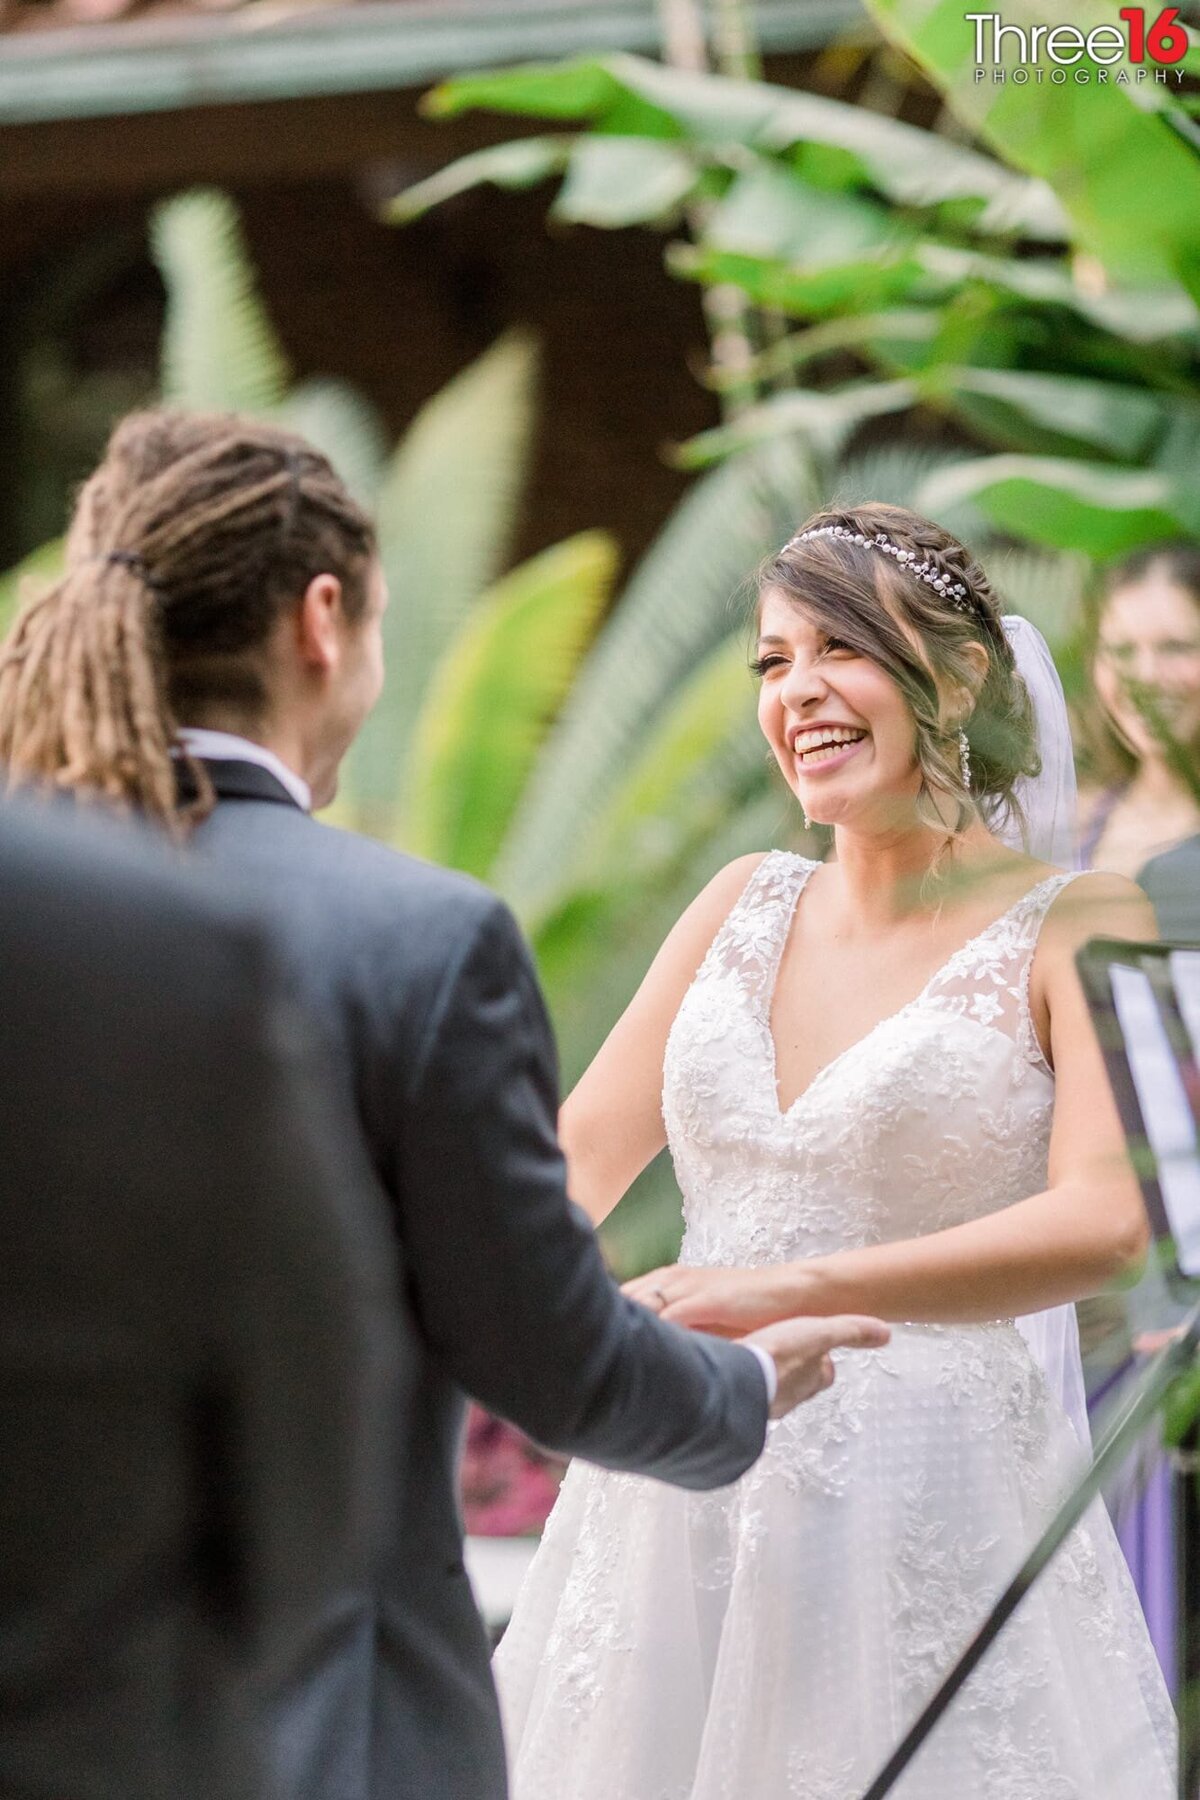 Bride gives her Groom a really big smile as she takes his hands while standing at the altar